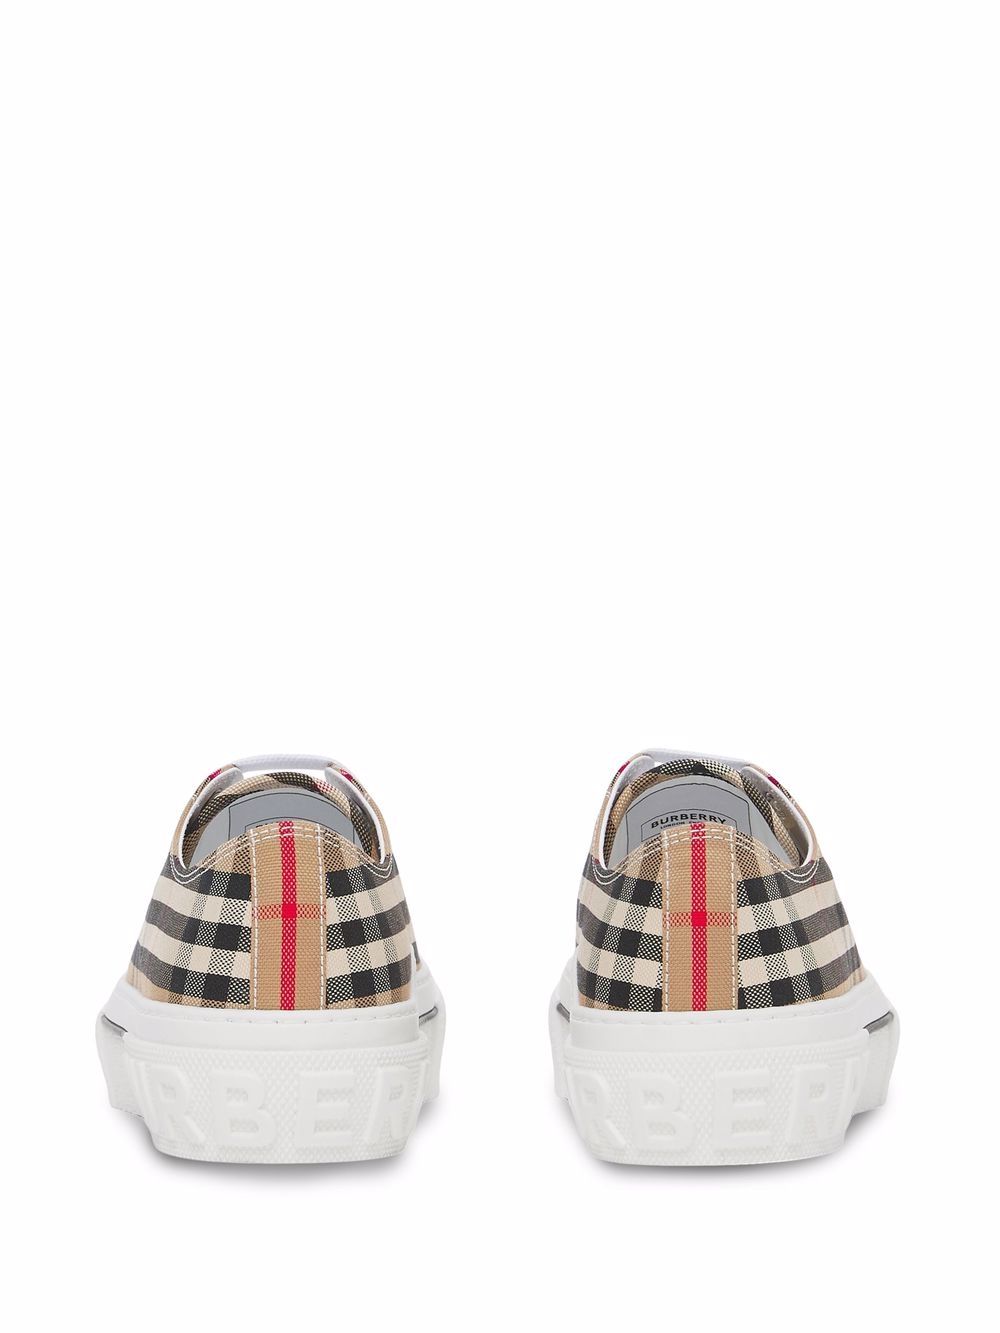 BURBERRY Beige Check Low Top Sneakers for Women - FW24